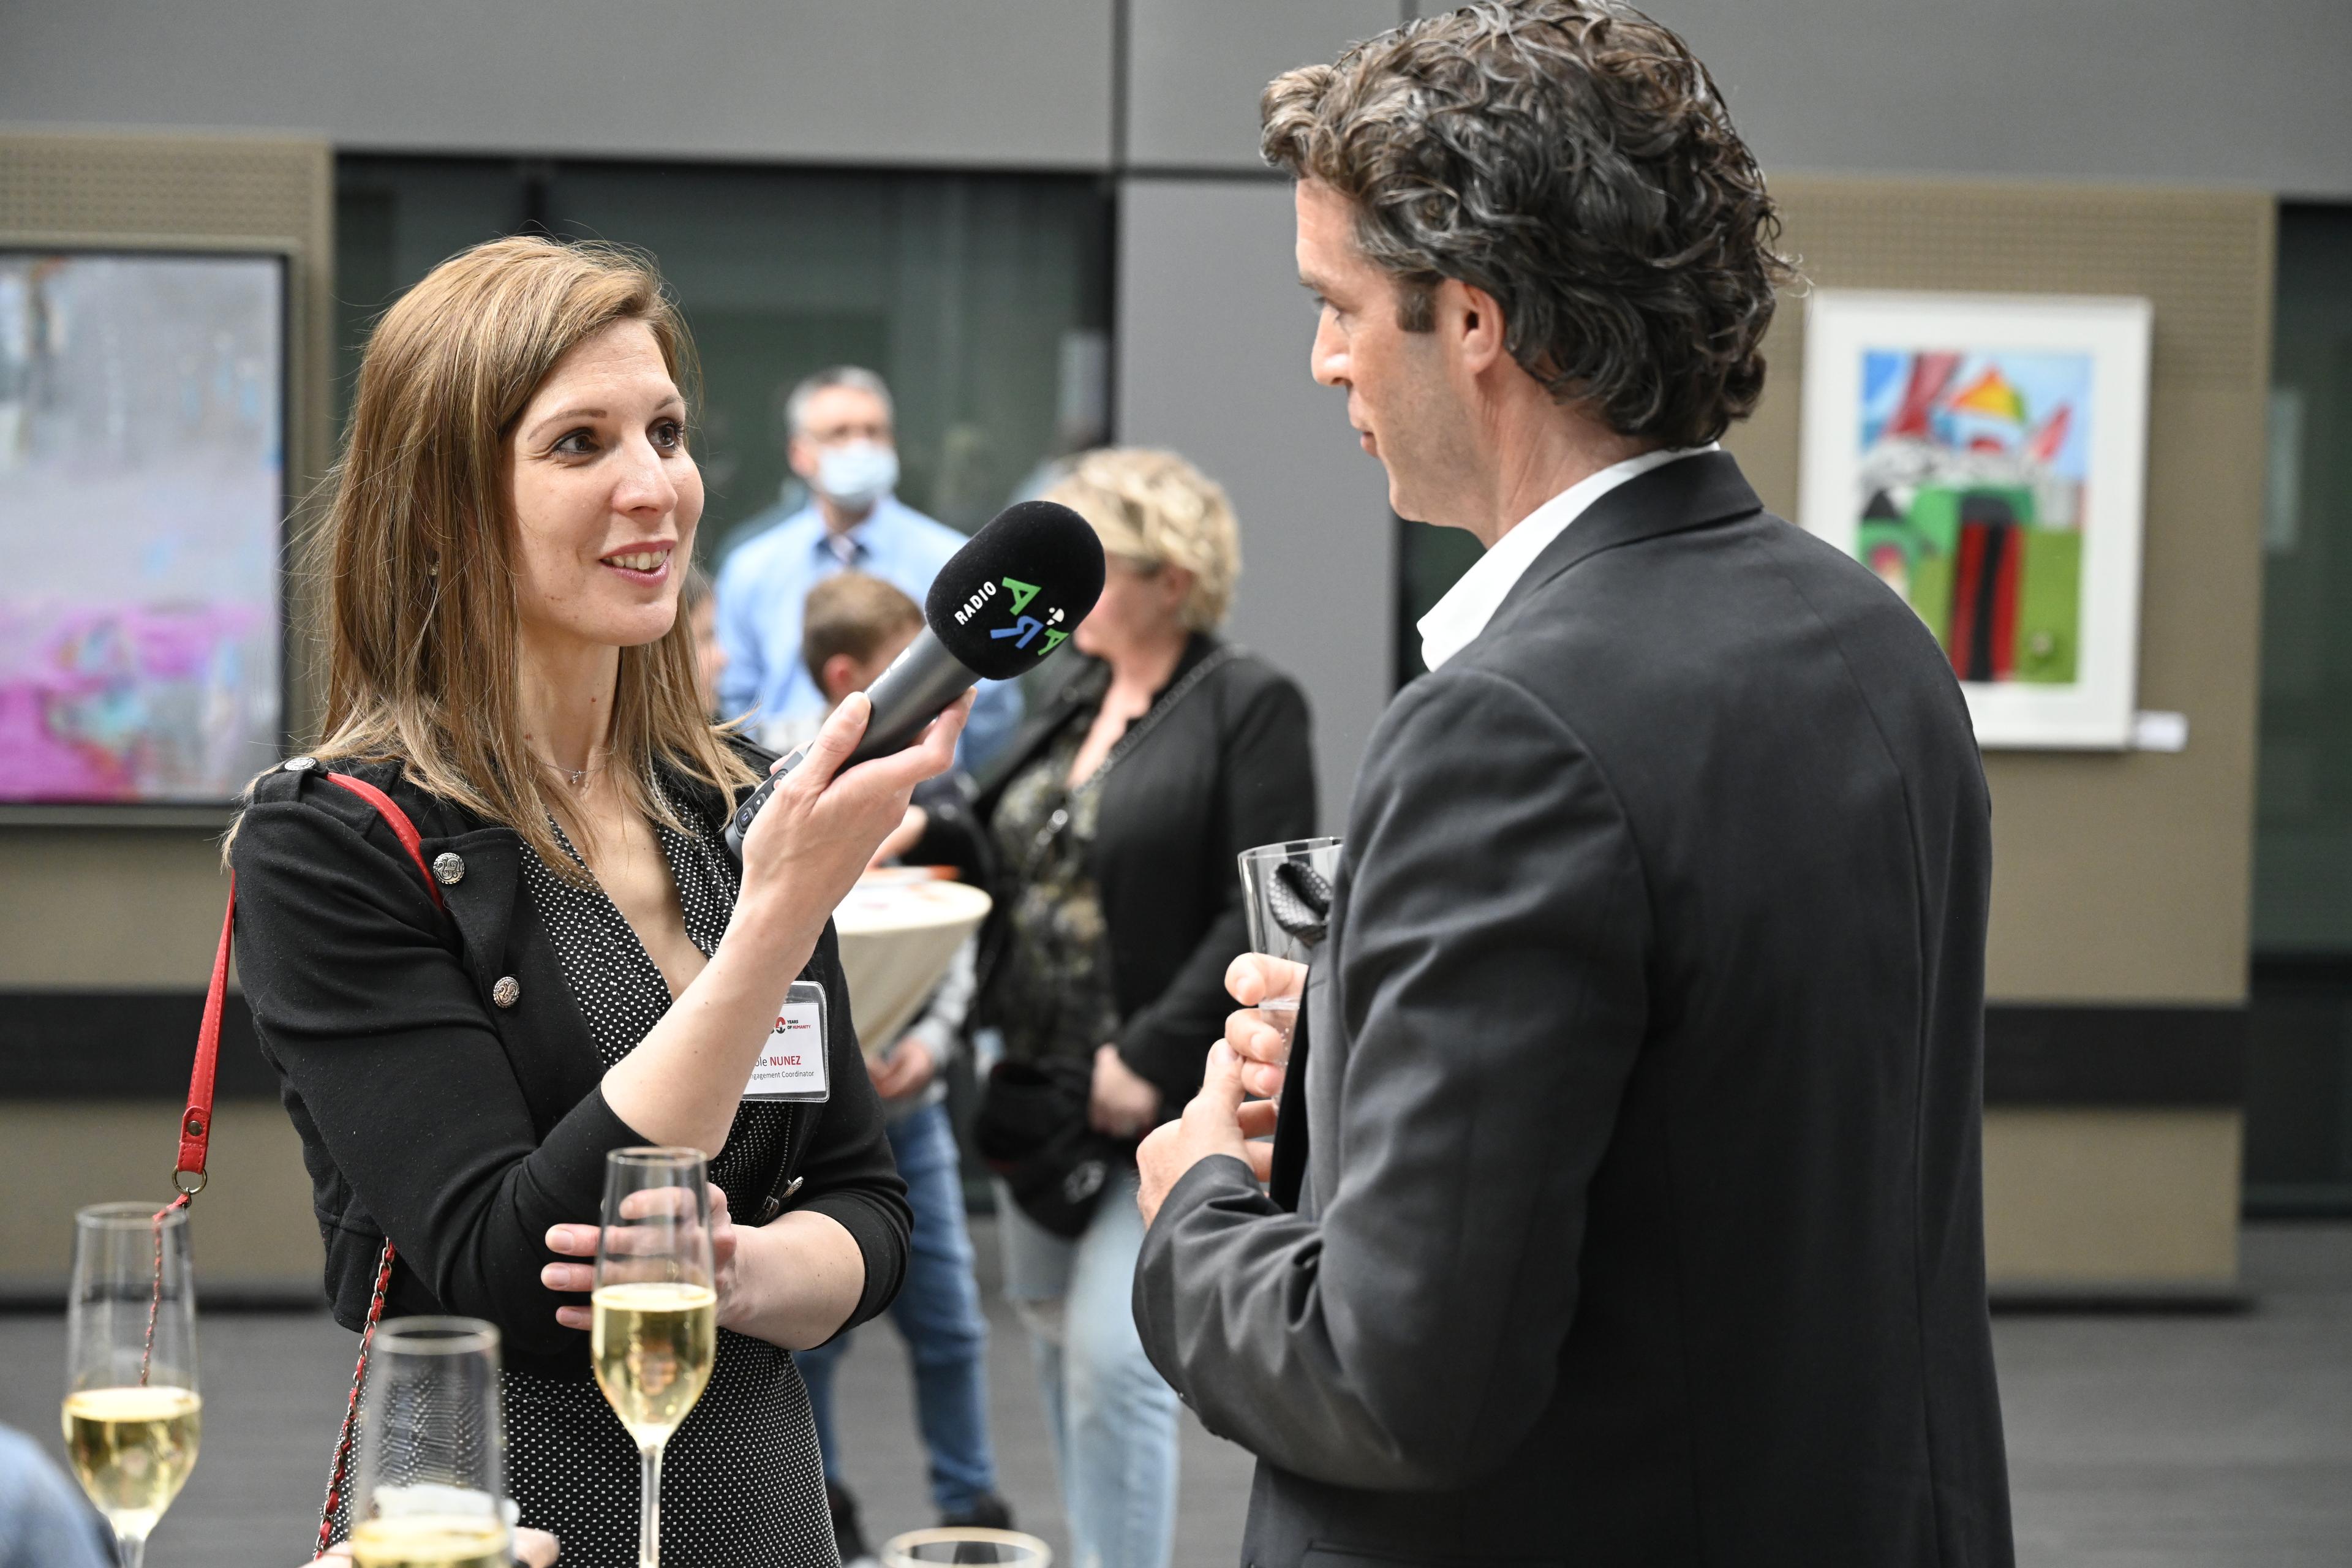 MSF Luxembourg interviews British artist Ben Carter for its radio broadcast on Radio ARA during the exhibition. April 24,2022 